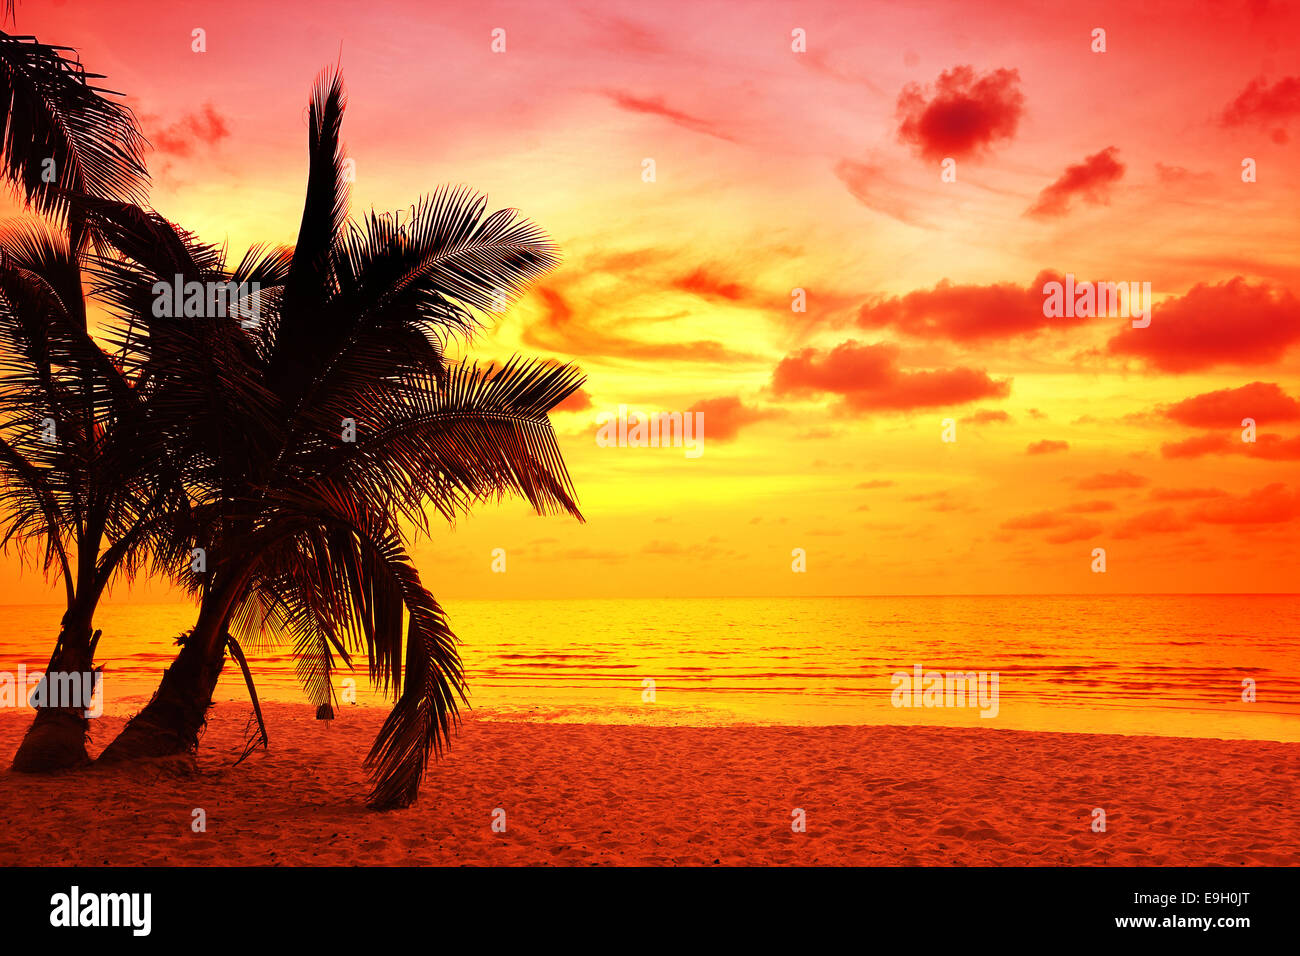 coconut palm trees silhouette at Koh Kood, Thailand Stock Photo